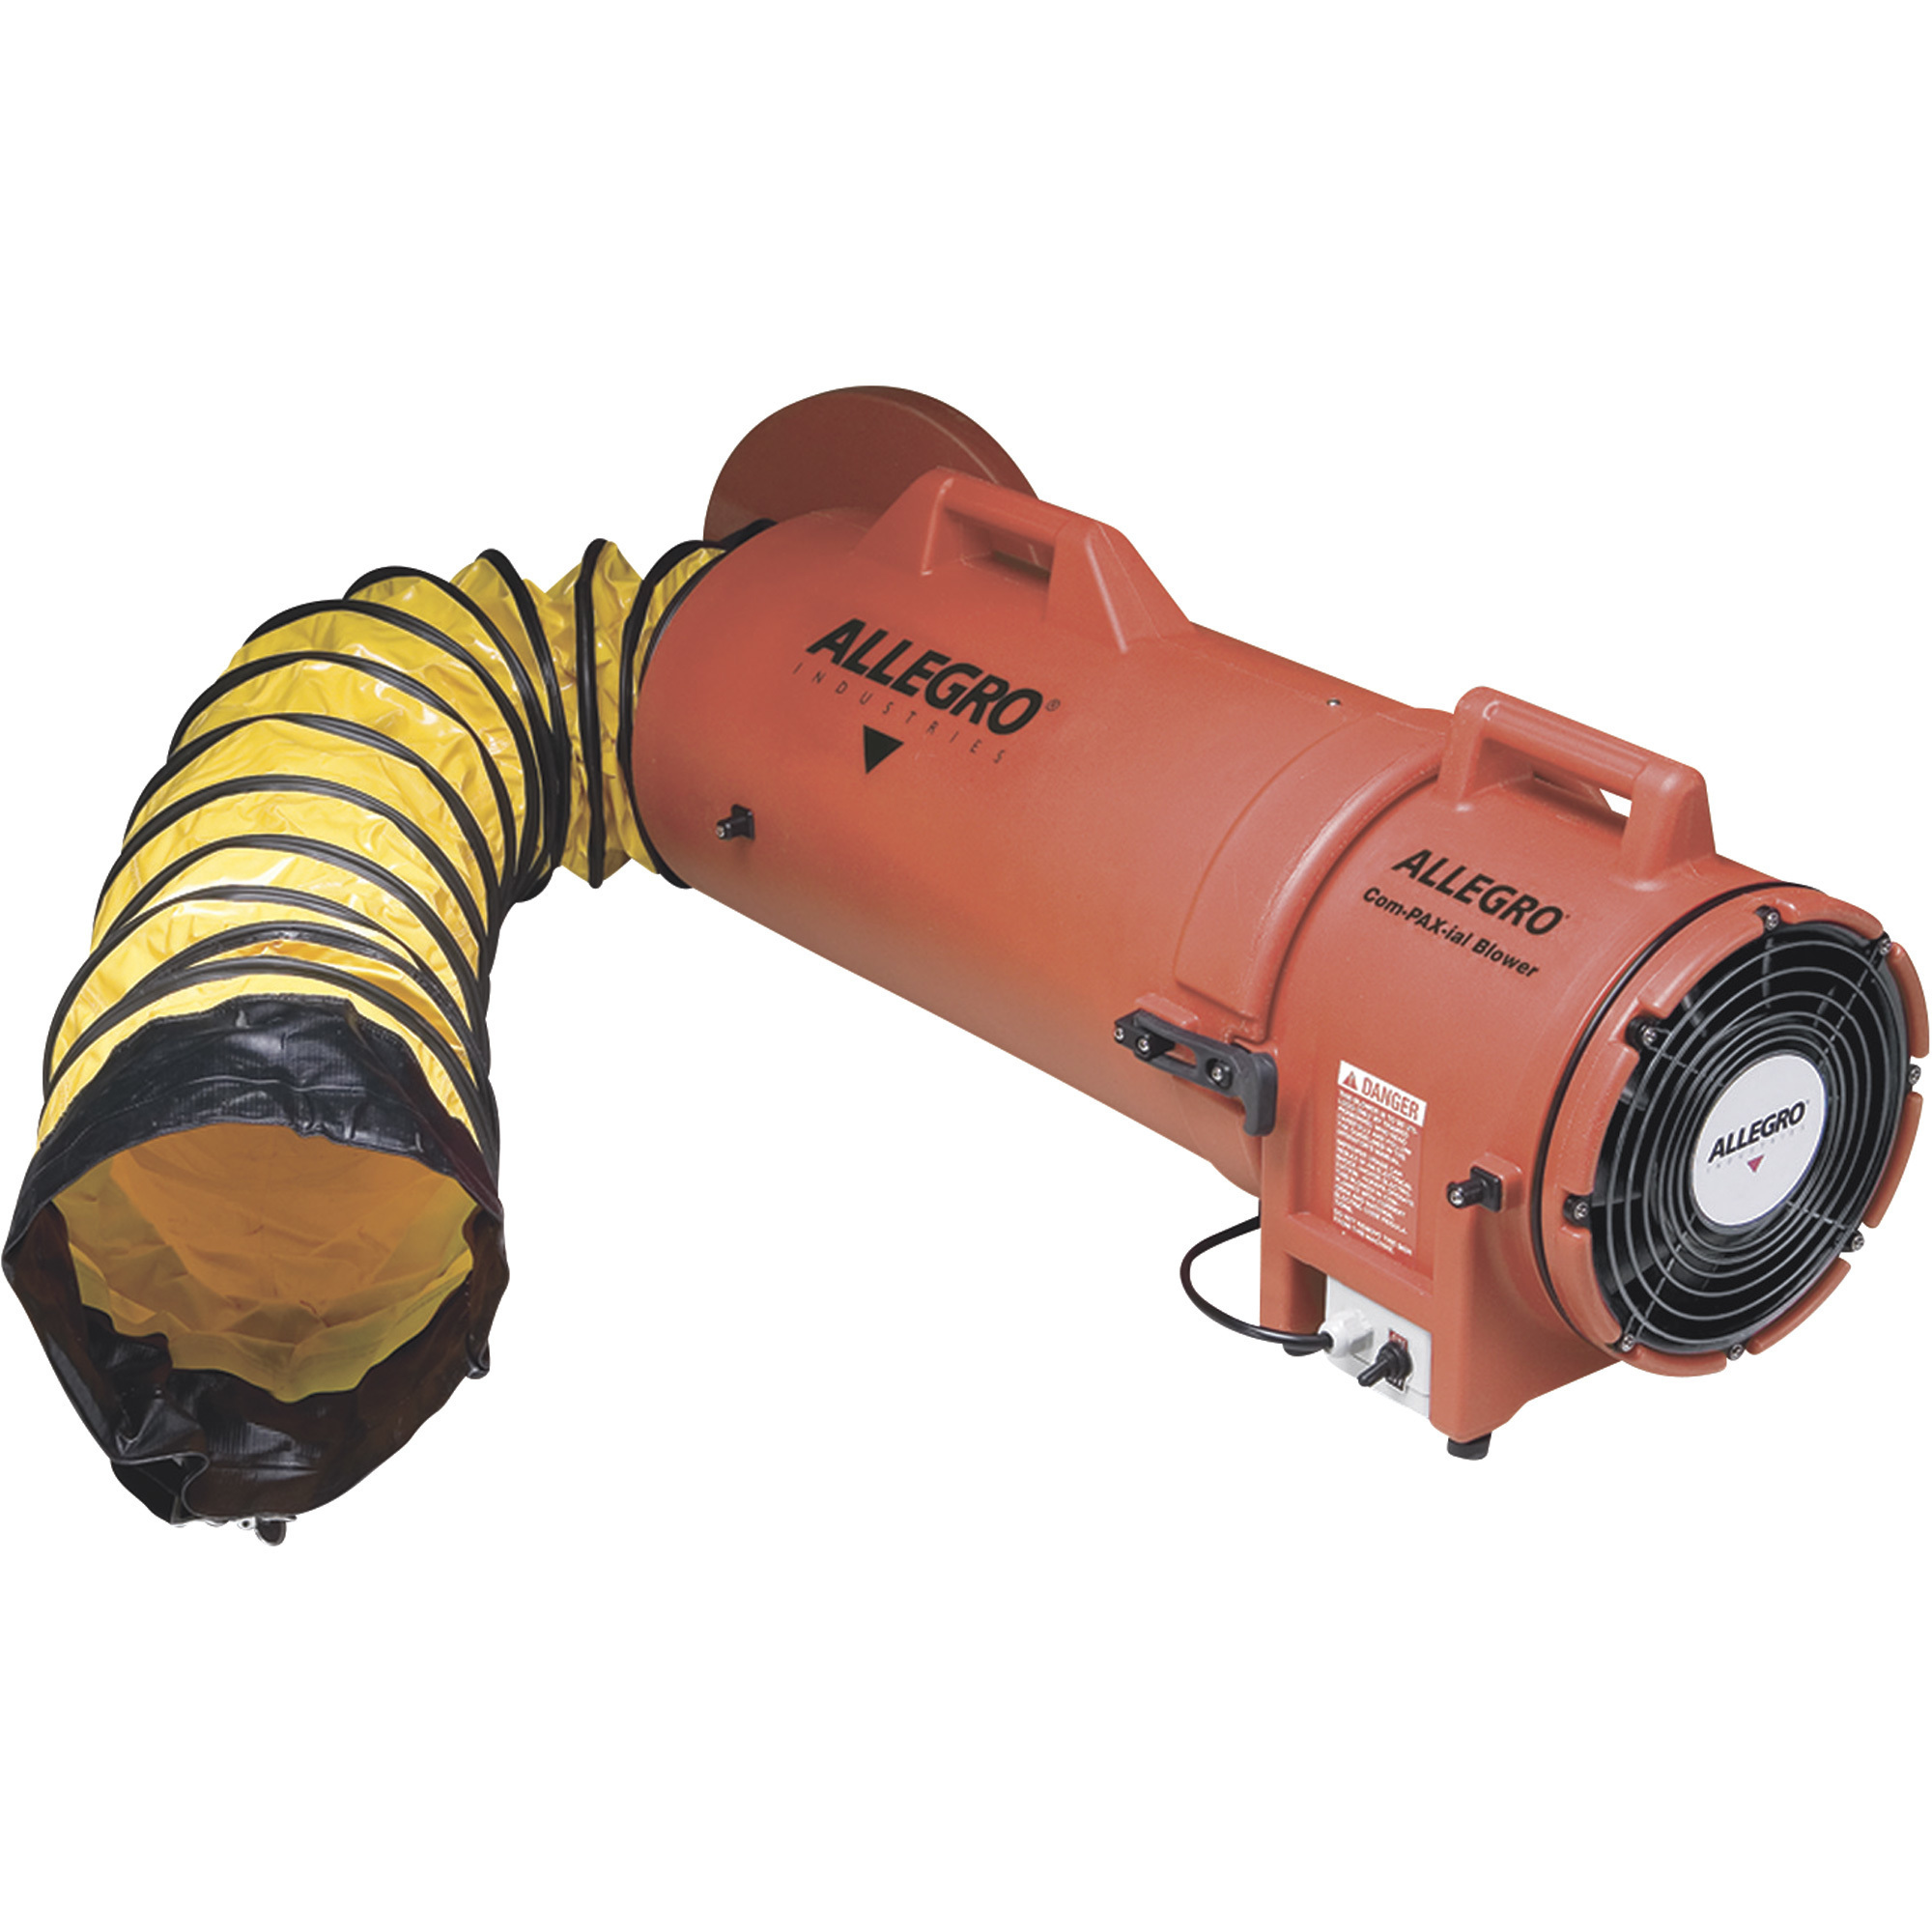 Allegro Industries Air Mover AC Blower With Canister, 15ft. Ducting, Model 9533-15